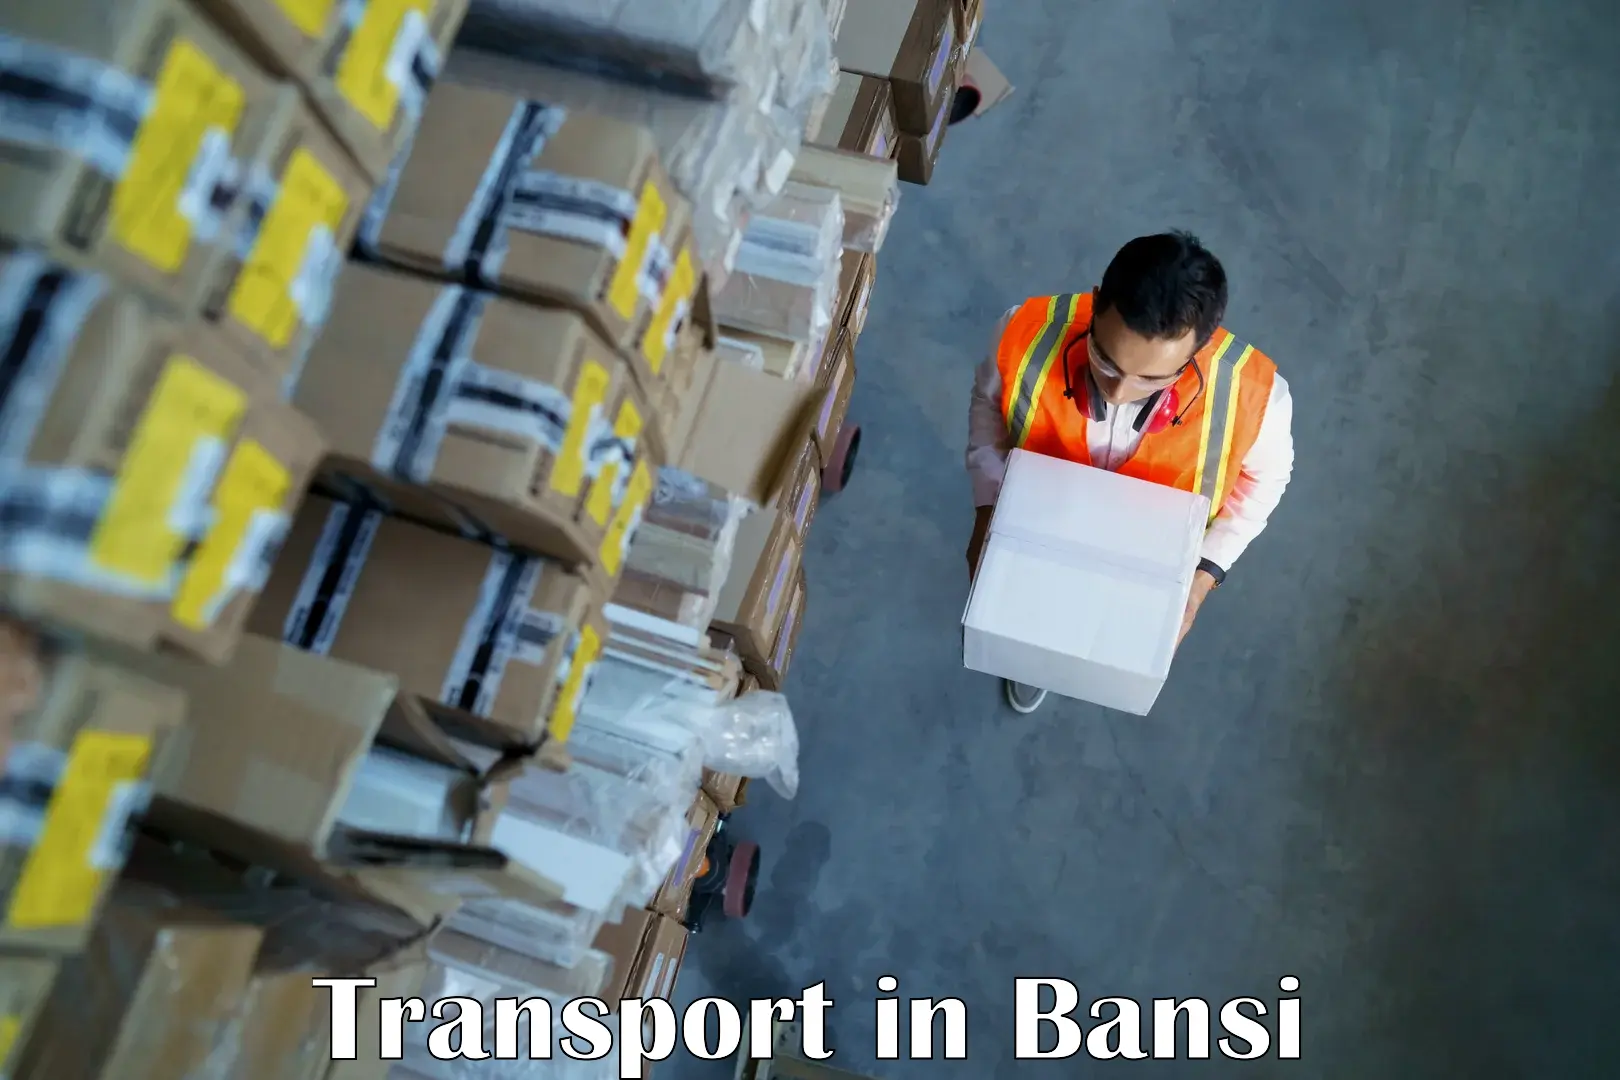 Container transportation services in Bansi